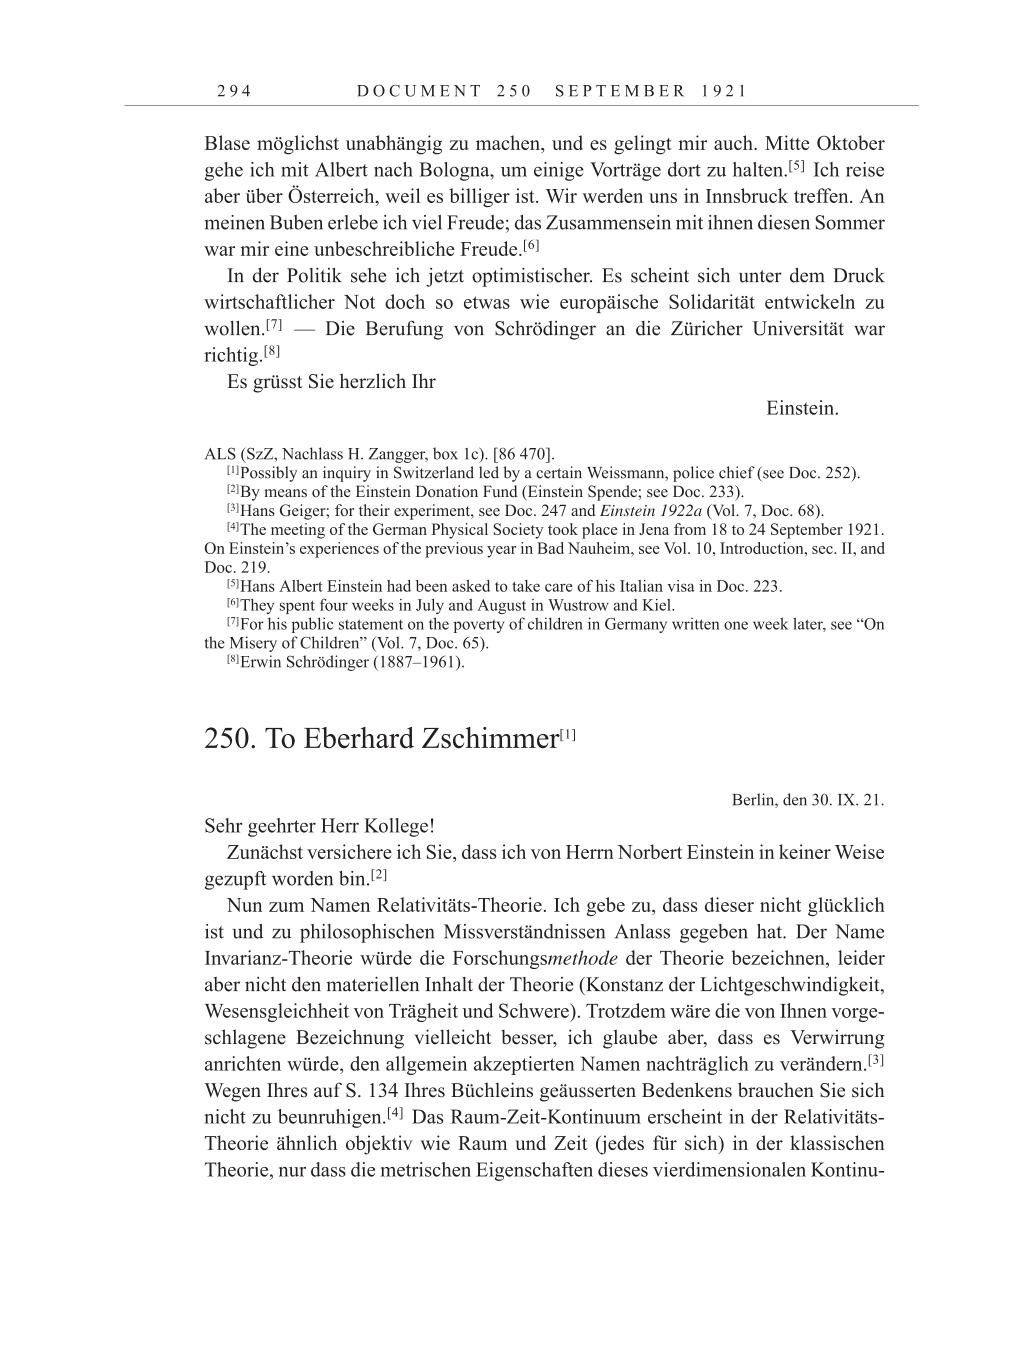 Volume 12: The Berlin Years: Correspondence January-December 1921 page 294